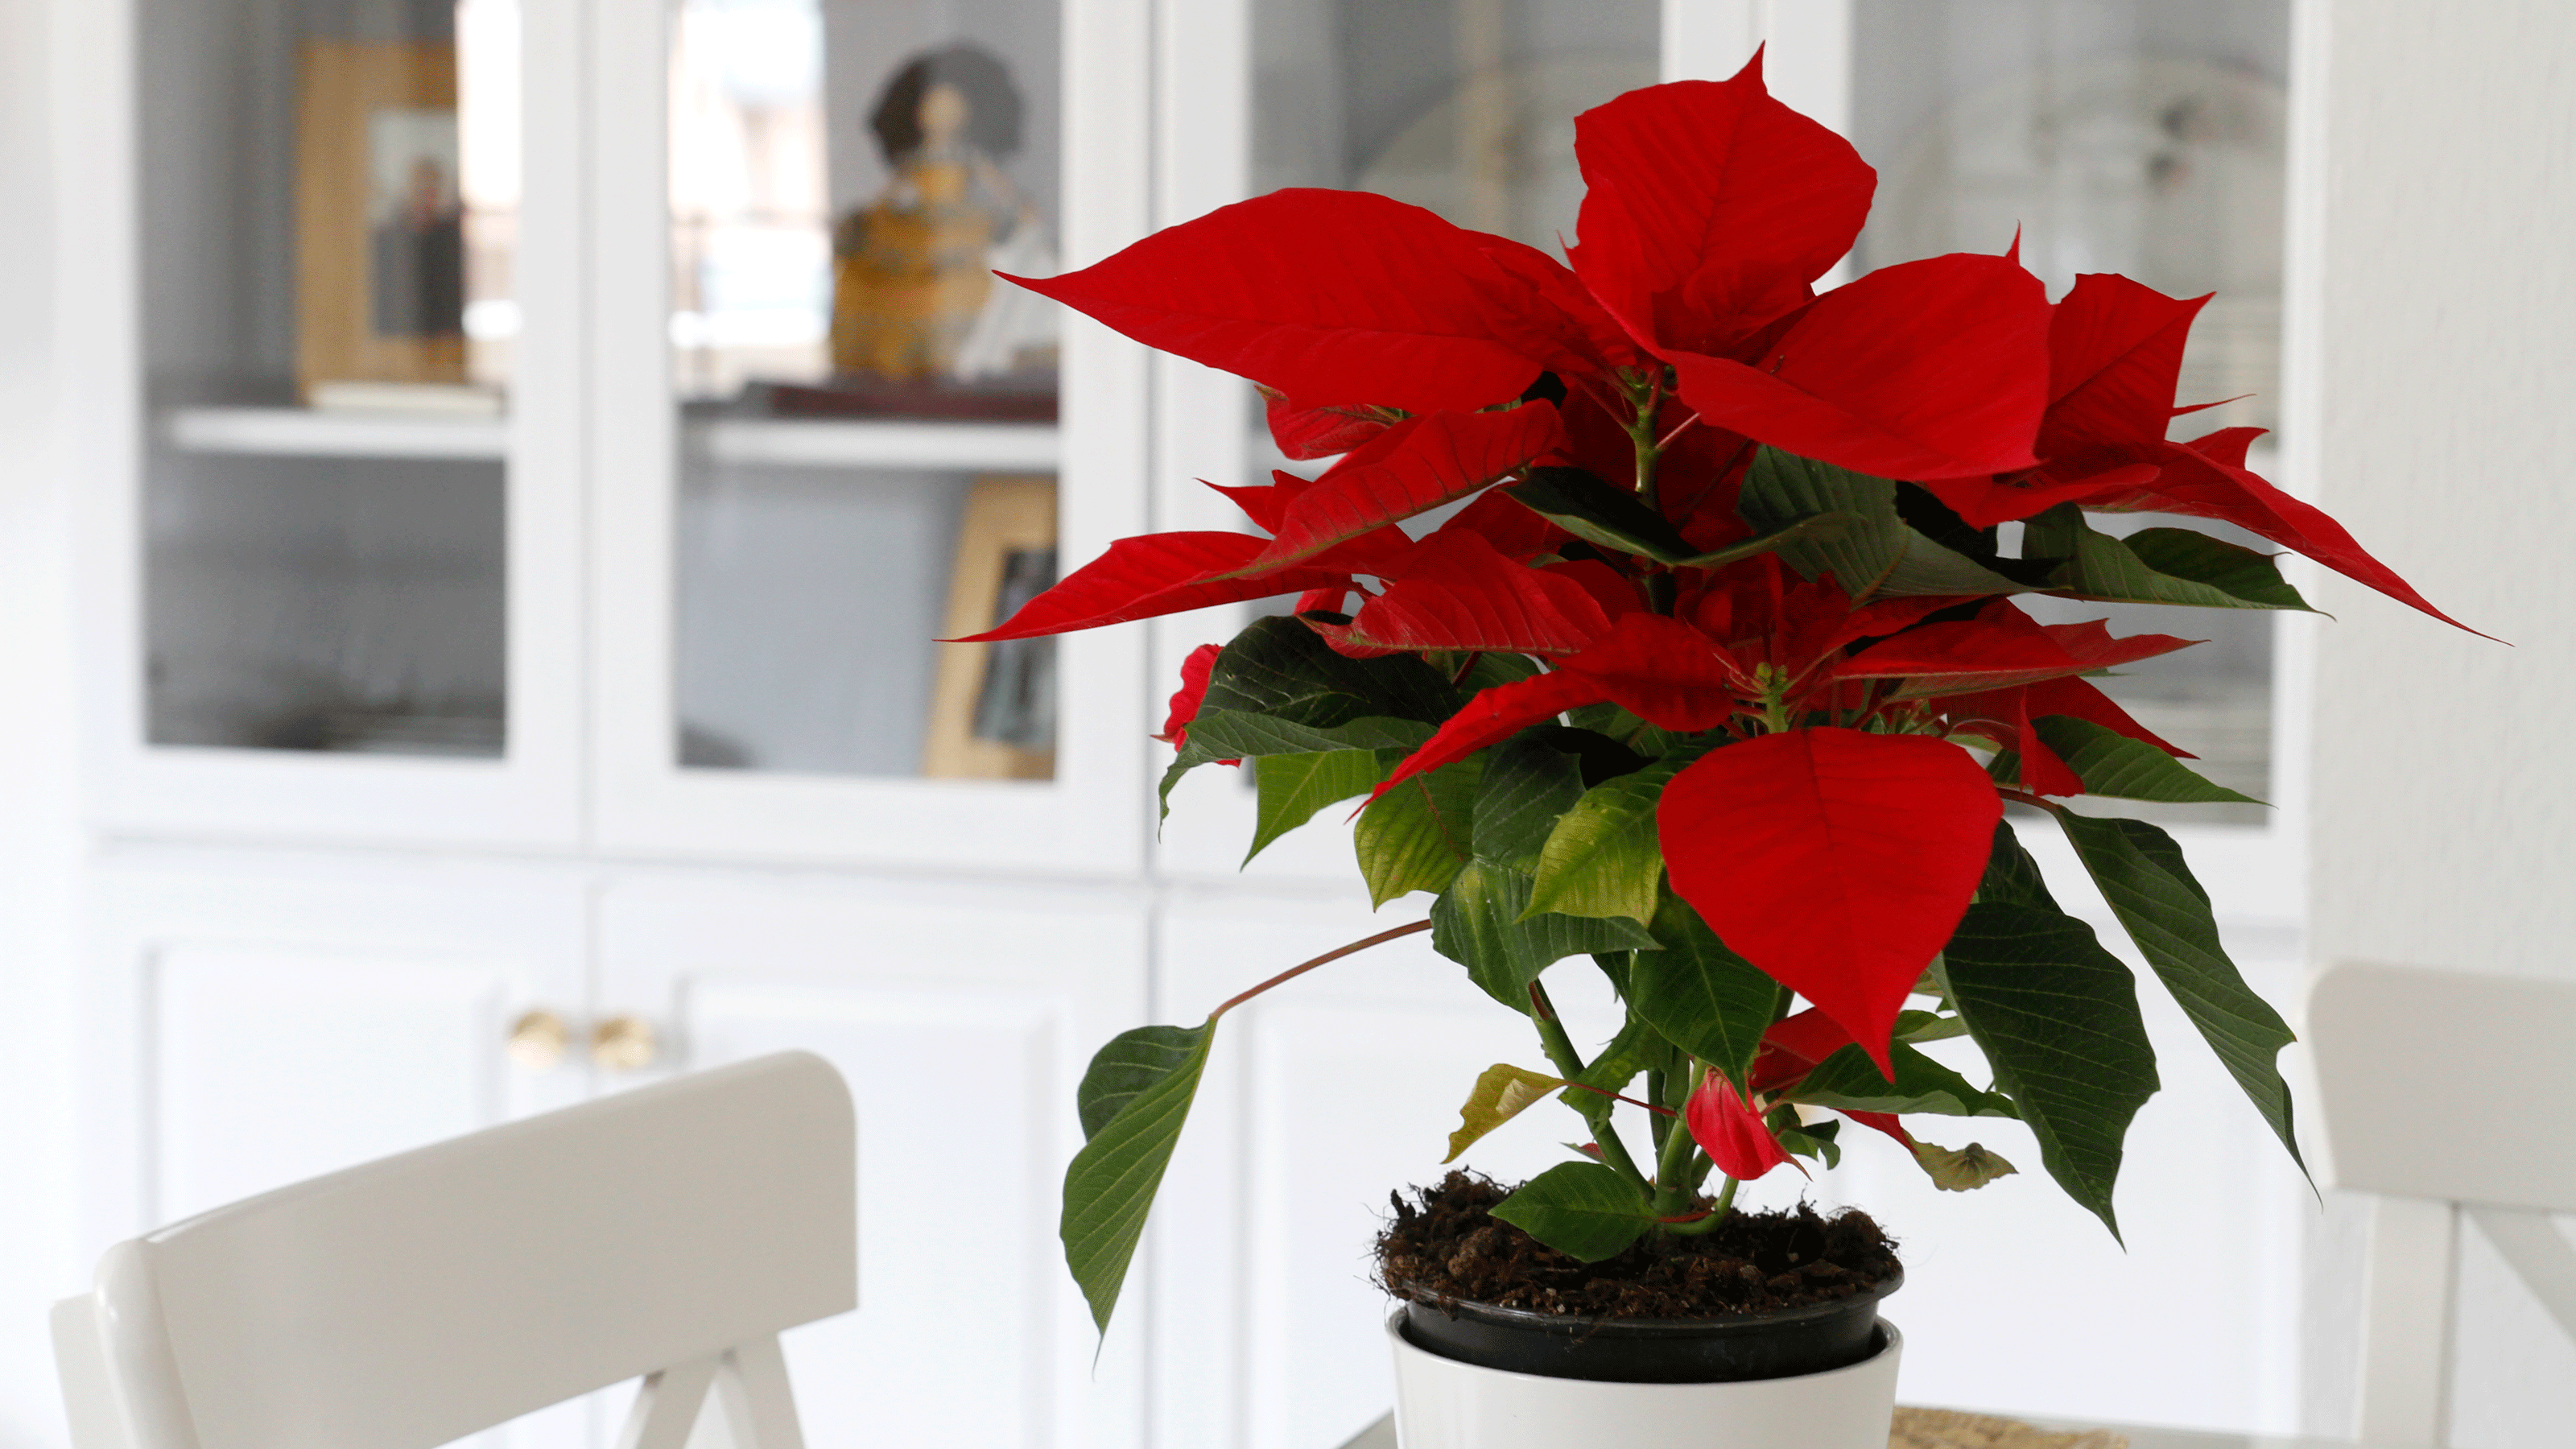 How To Keep A Poinsettia After Christmas Poinsettia care tips – expert advice to care for Christmas plants | Ideal  Home